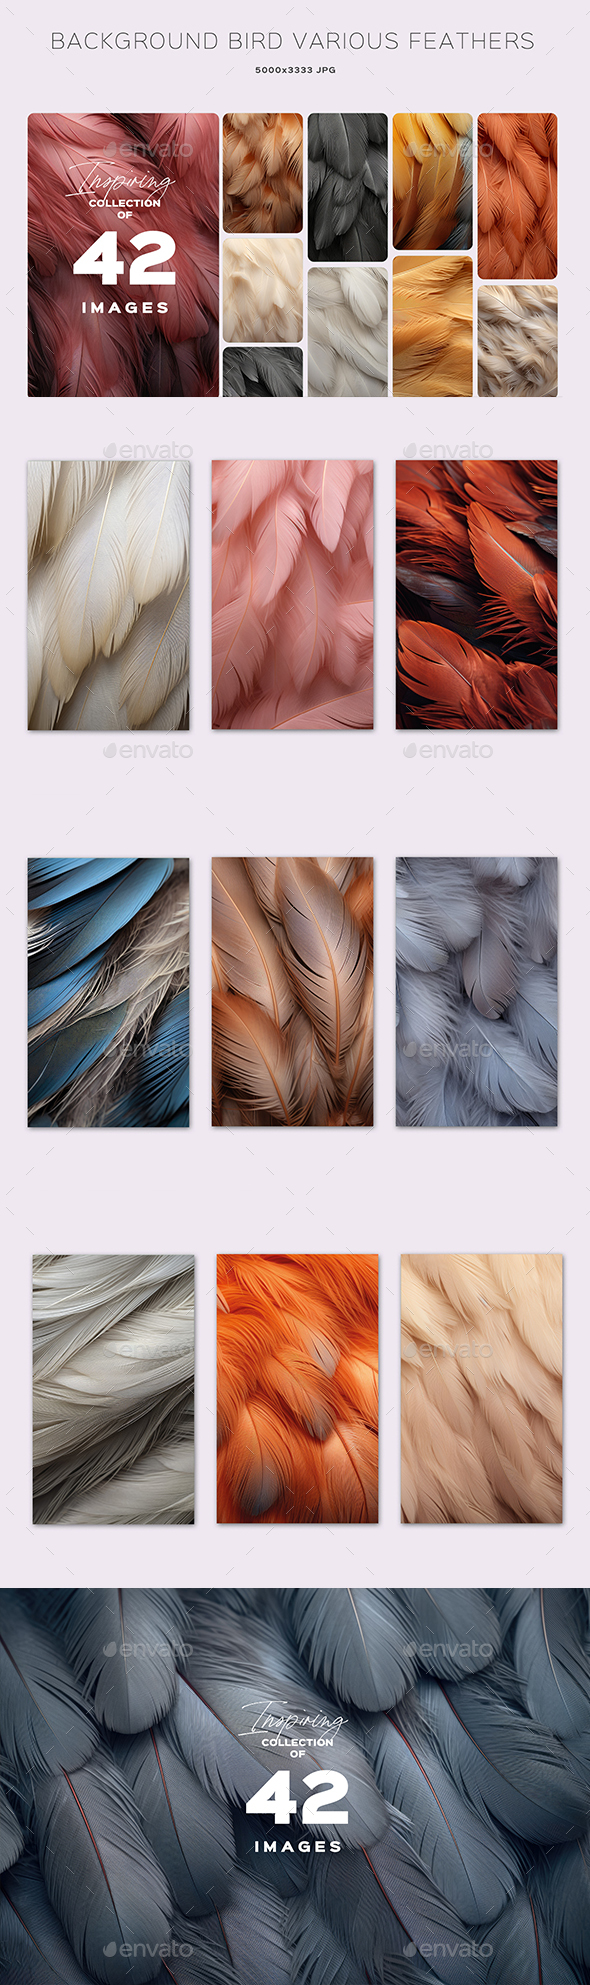 [DOWNLOAD]Background Bird Various Feathers